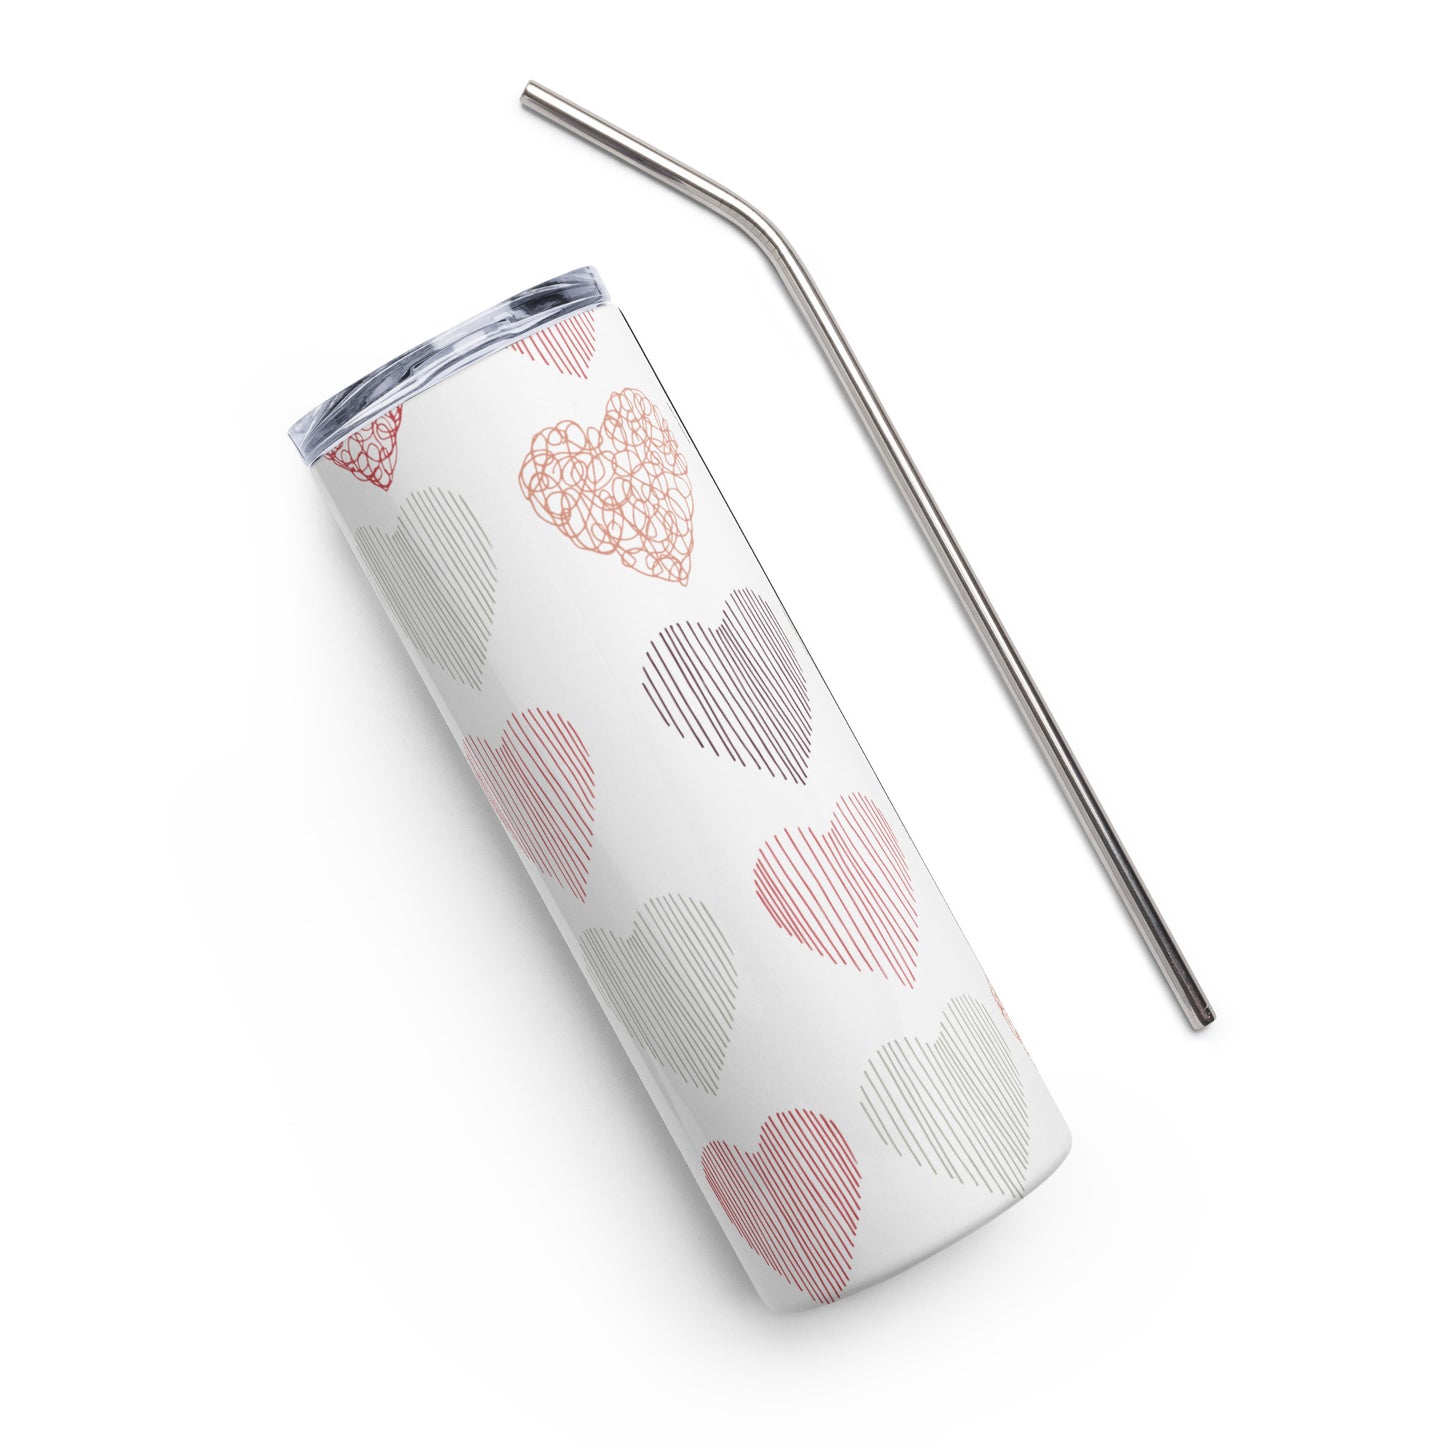 Drawn Hearts Stainless steel tumbler